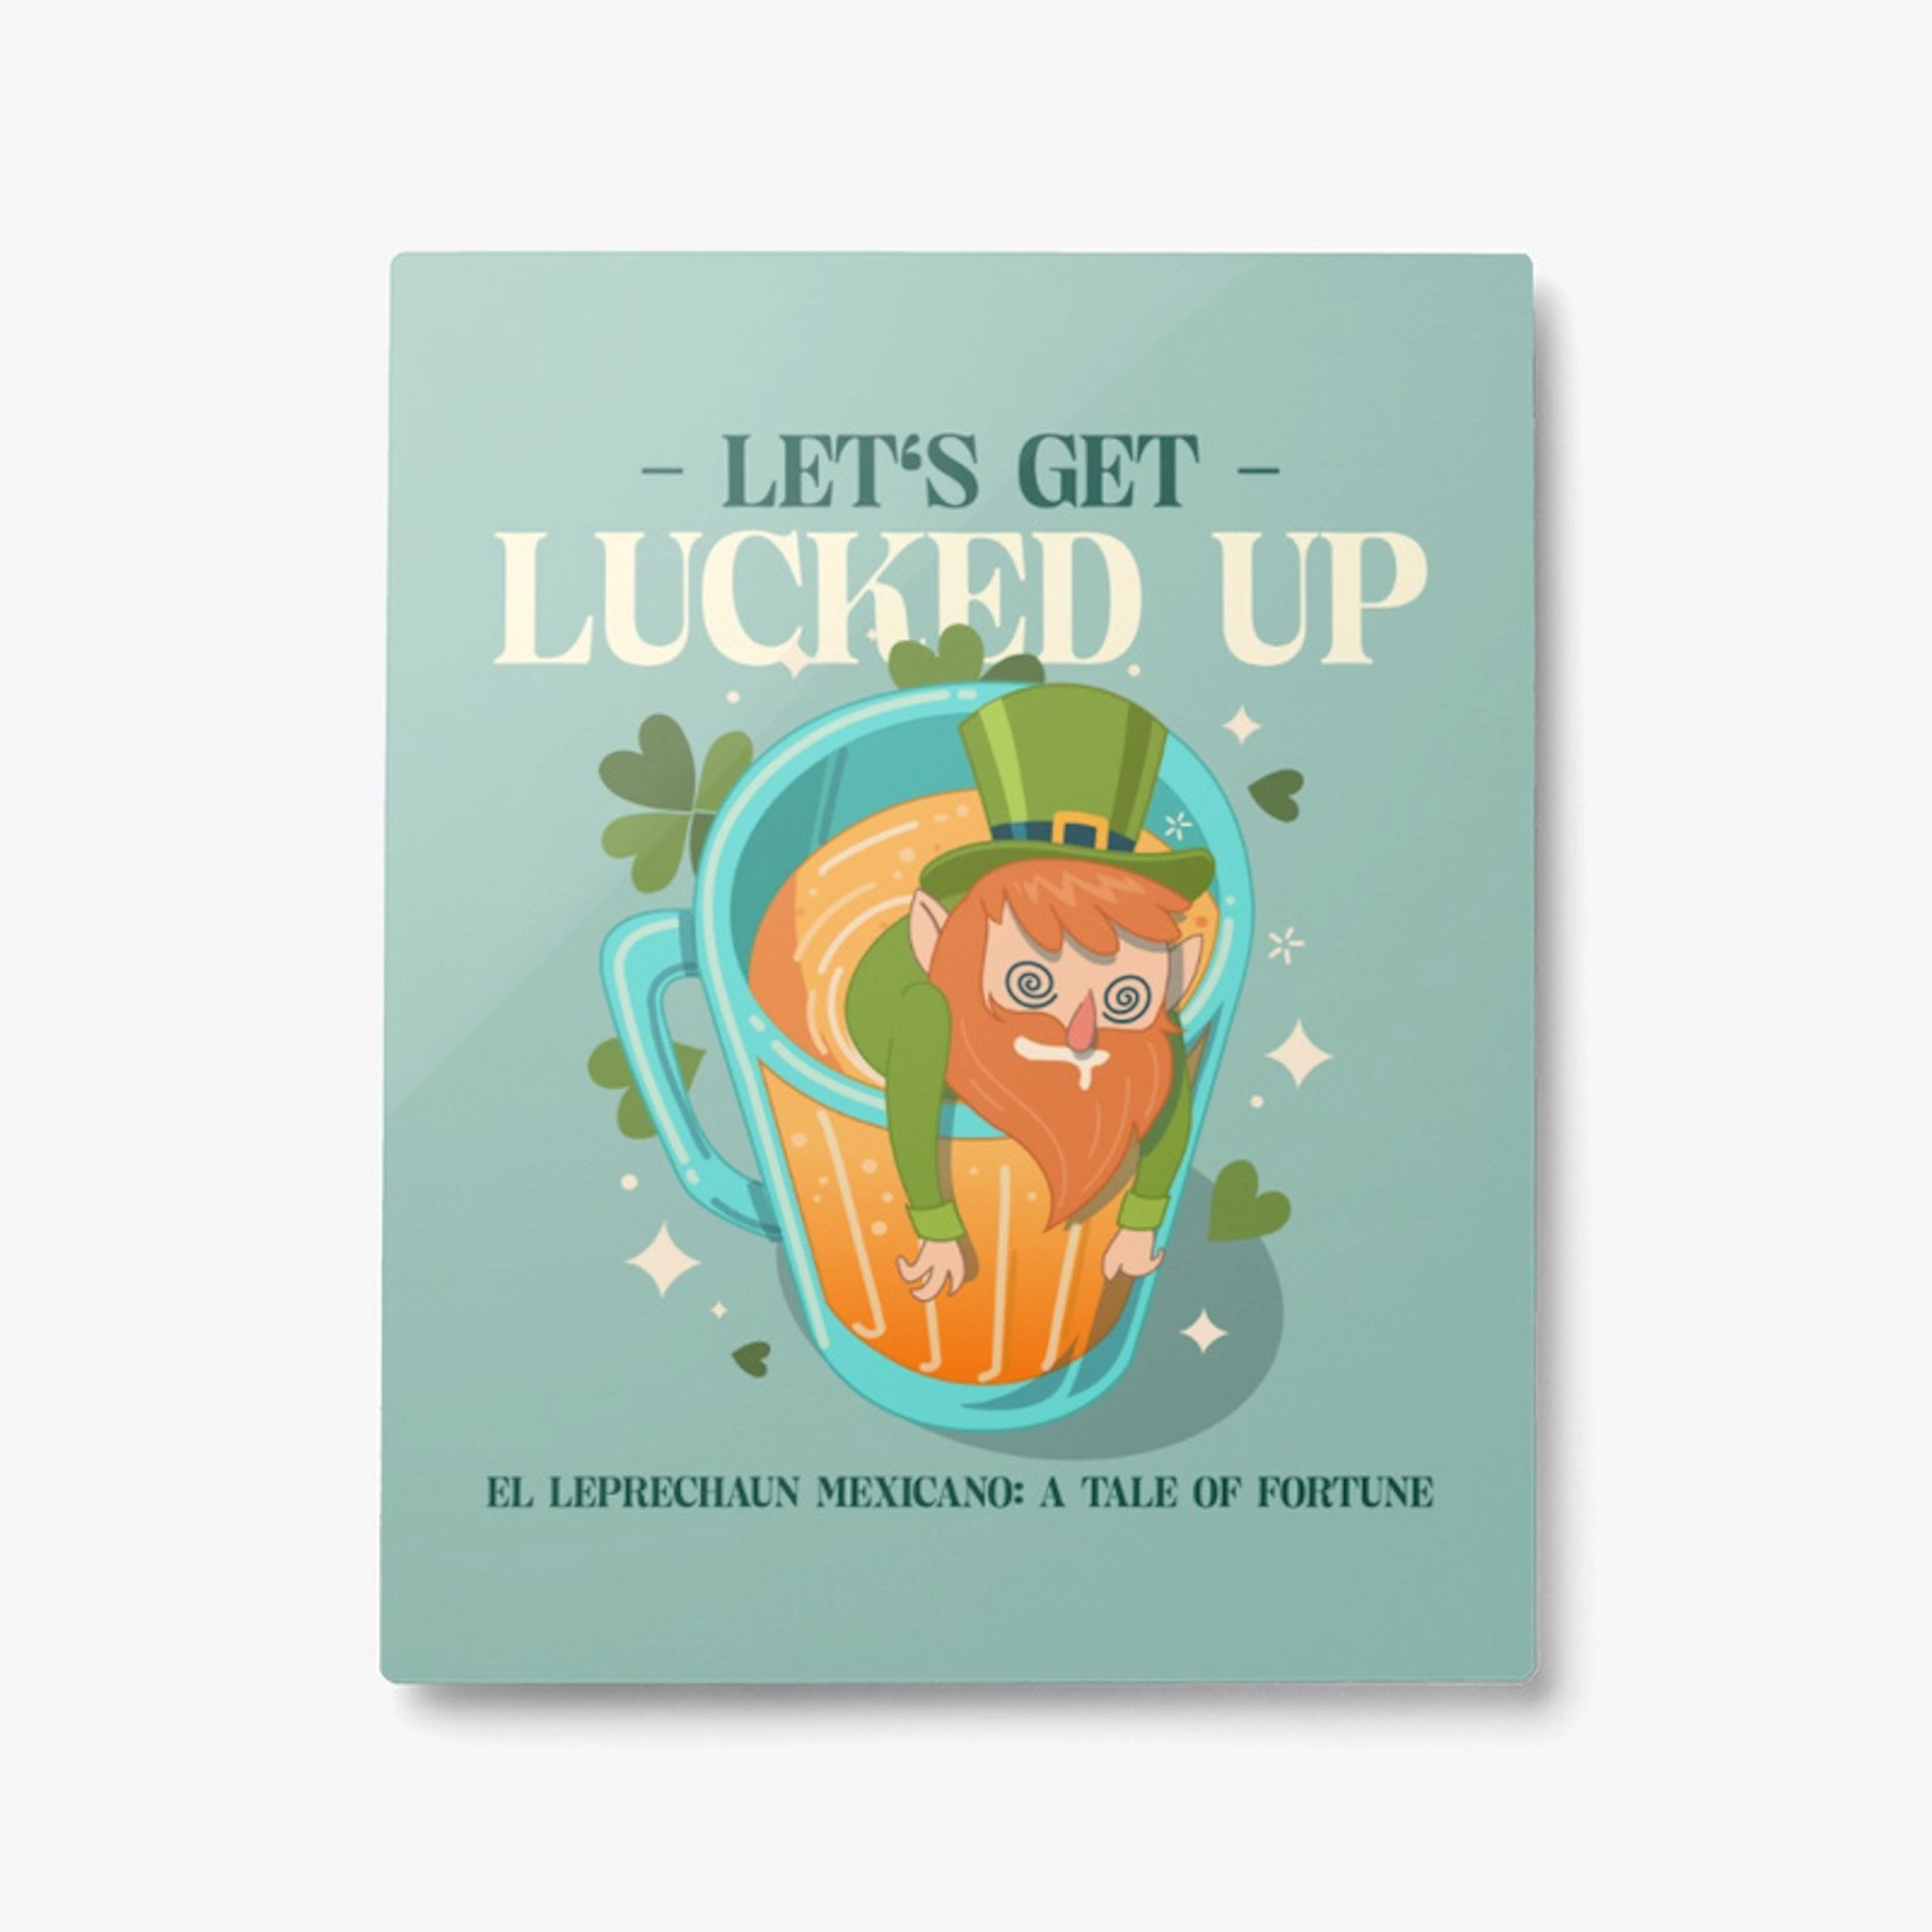 Let's Get Lucked Up!